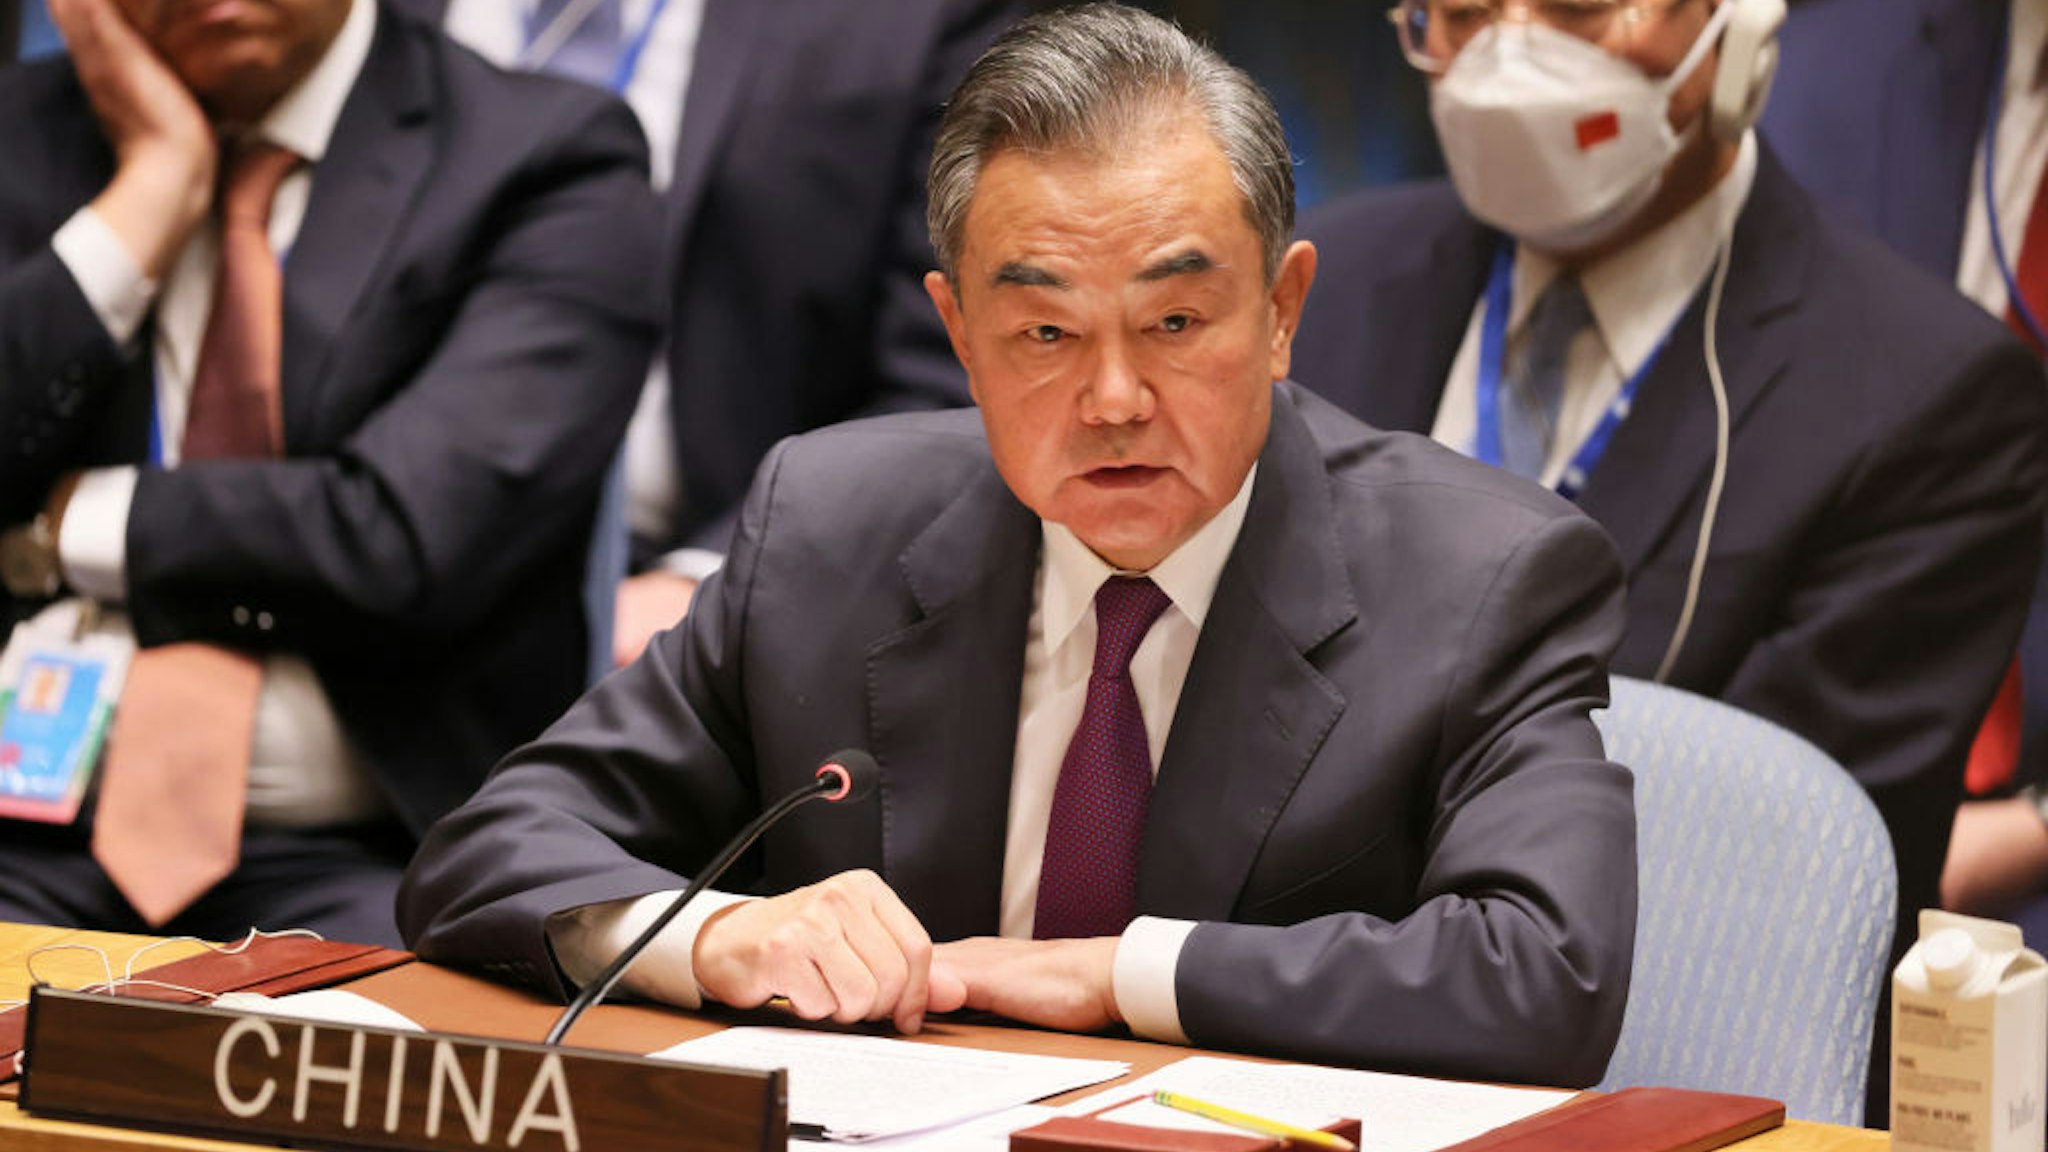 NEW YORK, NEW YORK - SEPTEMBER 22: China State Councilor and Minister of Foreign Affairs Wang Yi speaks during the United Nations Security Council meeting at the United Nations Headquarters to discuss the conflict in Ukraine on September 22, 2022 in New York City. Yesterday, Russian President Vladimir Putin announced a "partial mobilization" of Russian citizens, calling up 300,000 Russian reservists to fight in Ukraine. Putin also stated his support for a referendum to annex Russian-occupied territory in Ukraine, as well as his willingness to use nuclear weapons to defend the territories. In a remote speech yesterday at the U.N. Ukraine President Volodymyr Zelensky called for the revocation of Russia's veto power as a permanent member of the United Nations Security Council in a remote speech yesterday at the United Nations General Assembly.